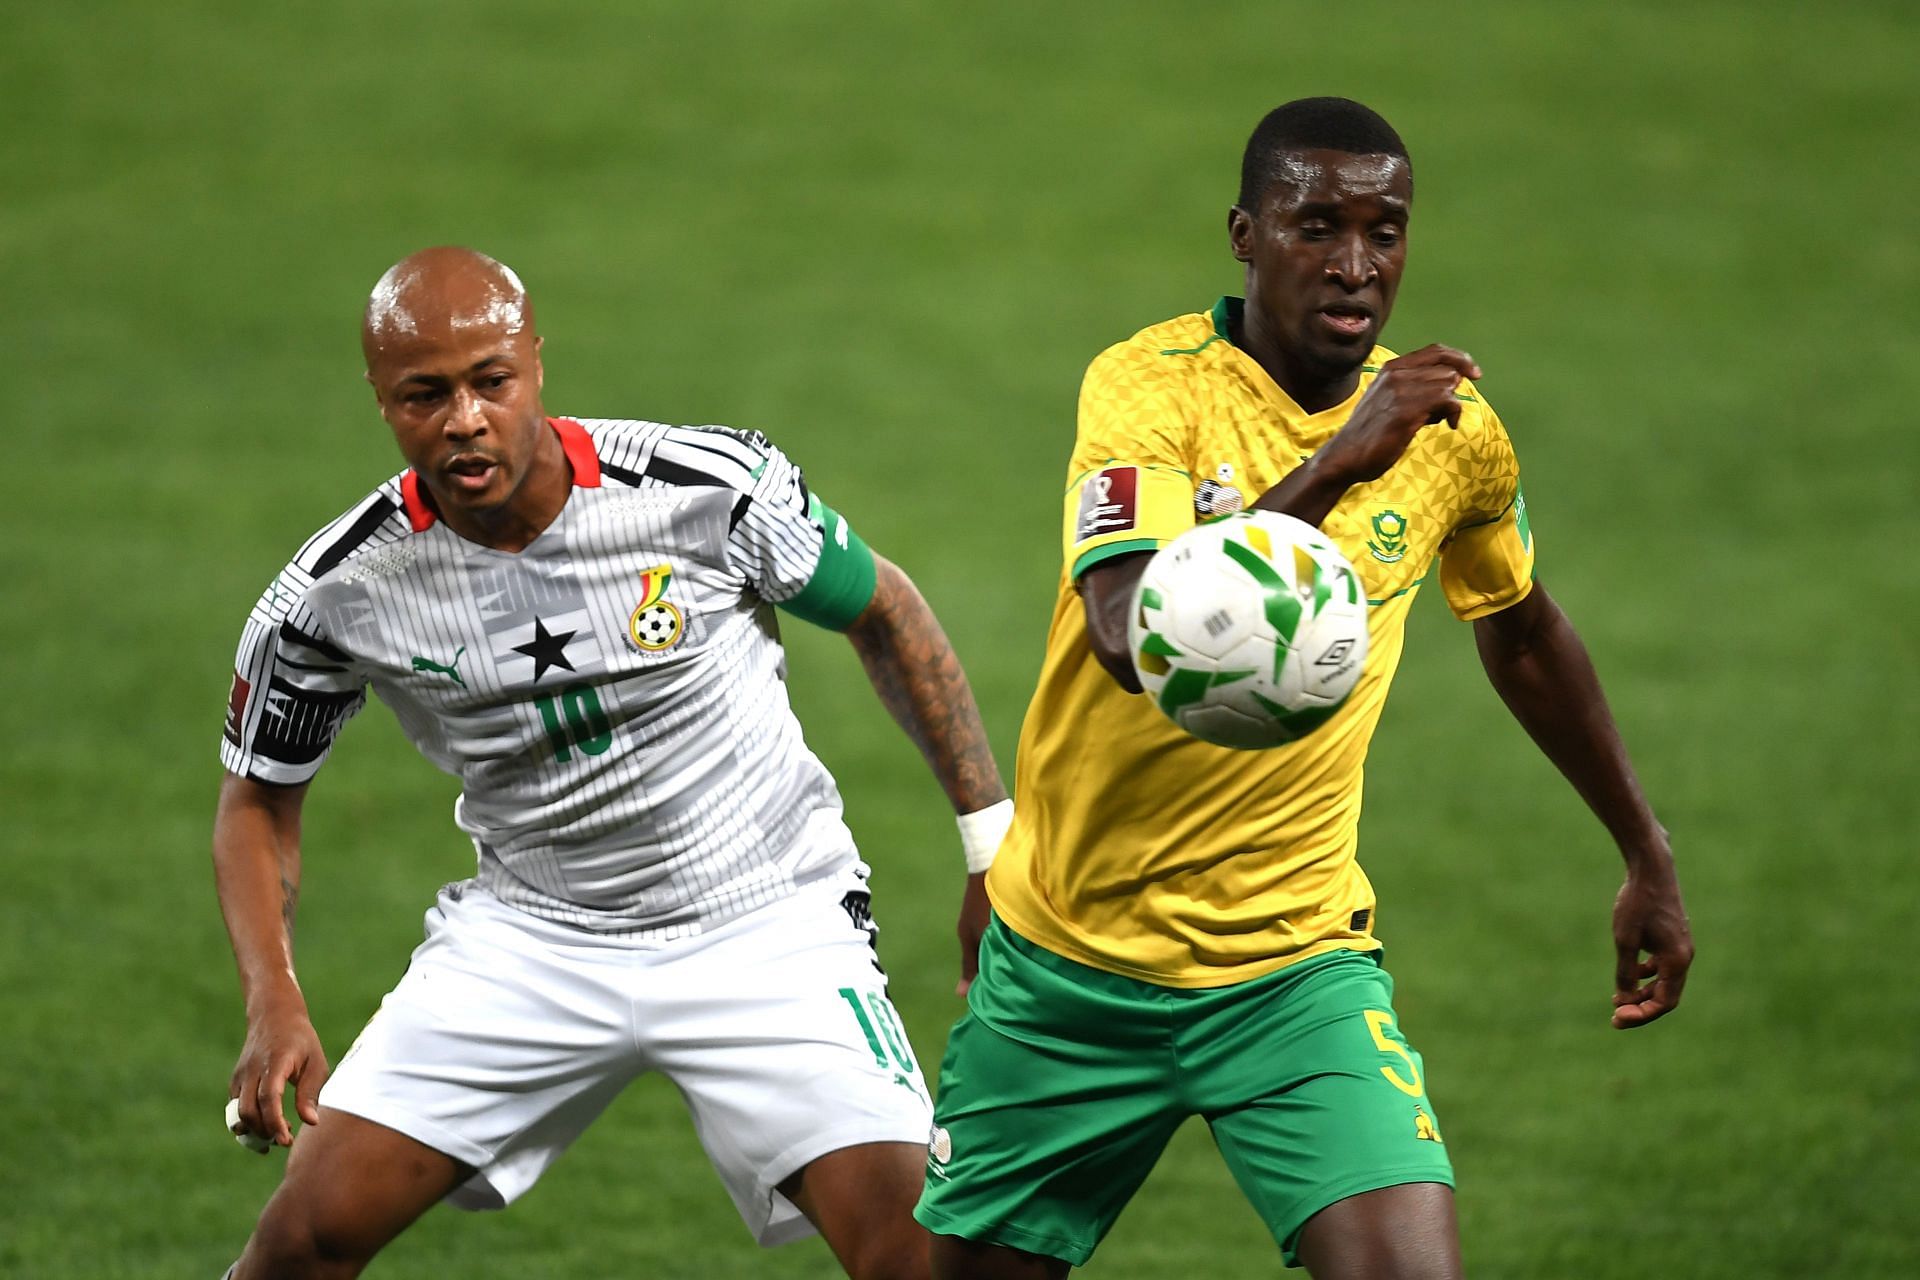 Ghana will be looking to return to winning ways against Gabon in their AFCON group stage fixture